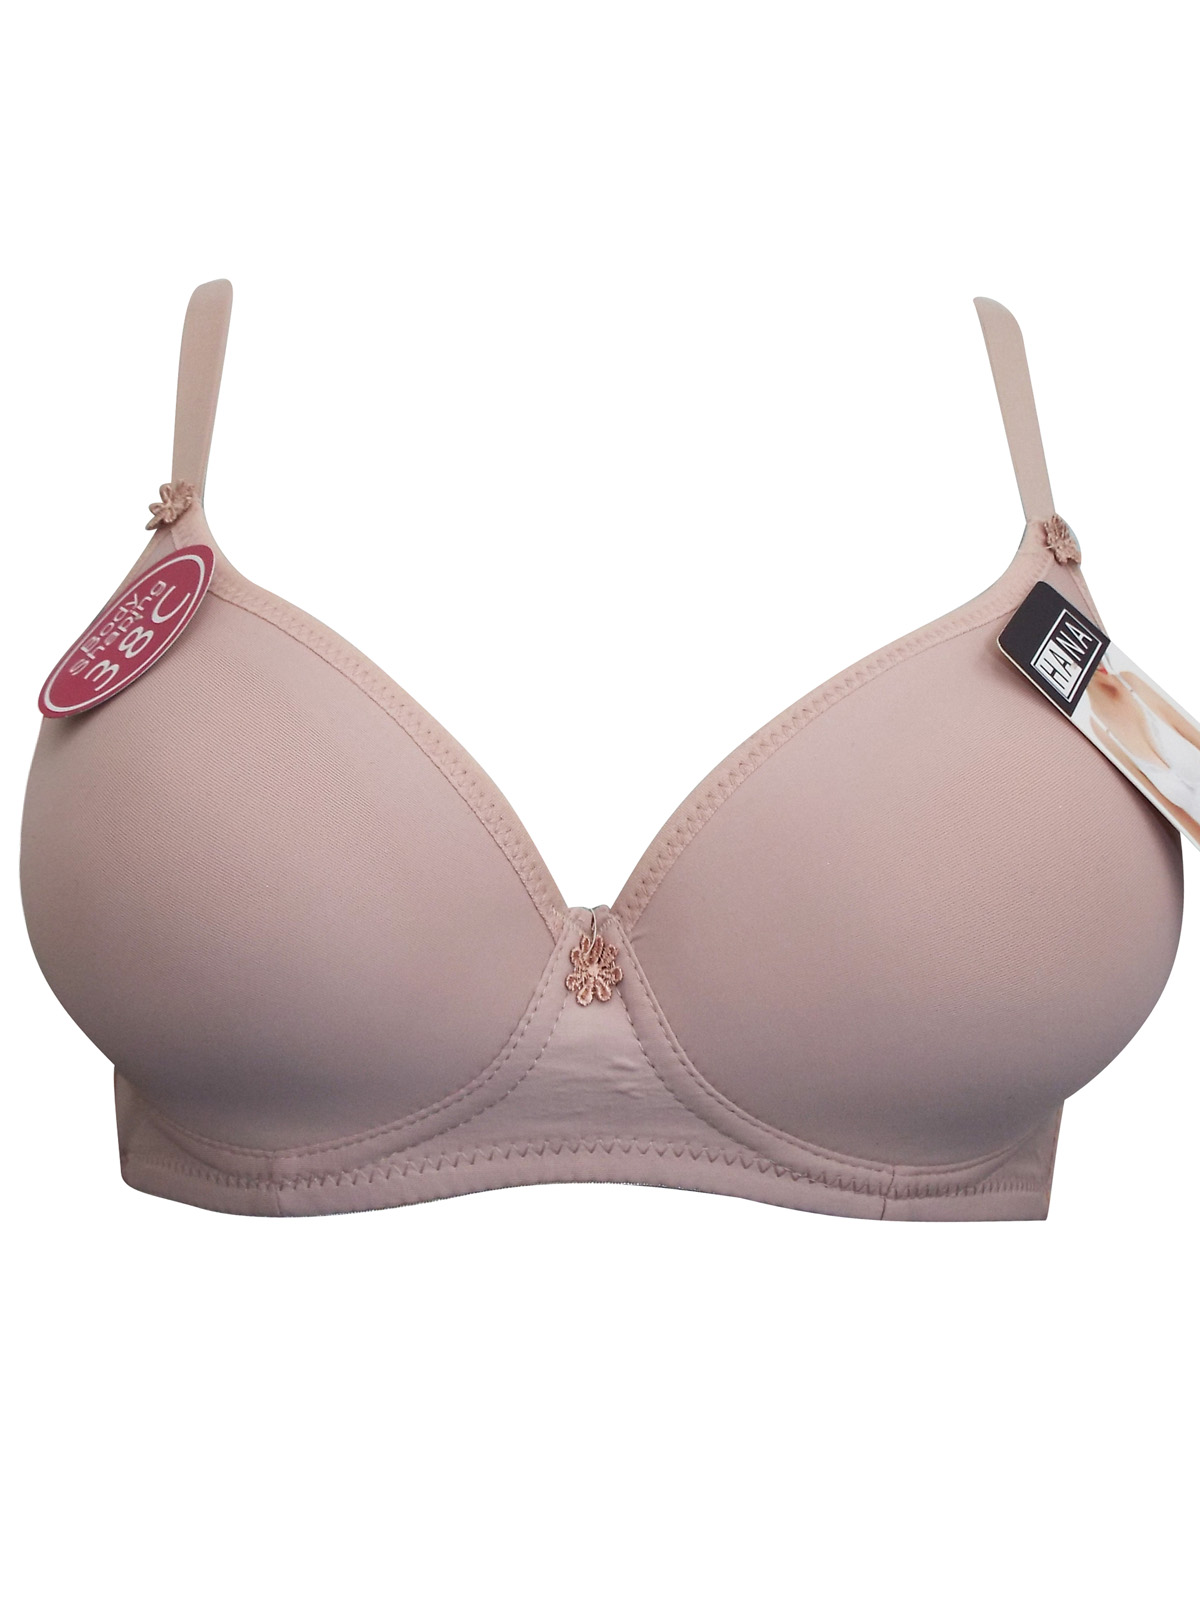 Hana - - Hana NUDE Padded Full Cup T-Shirt Support Bra - Size 38 to 48 (C  cup)